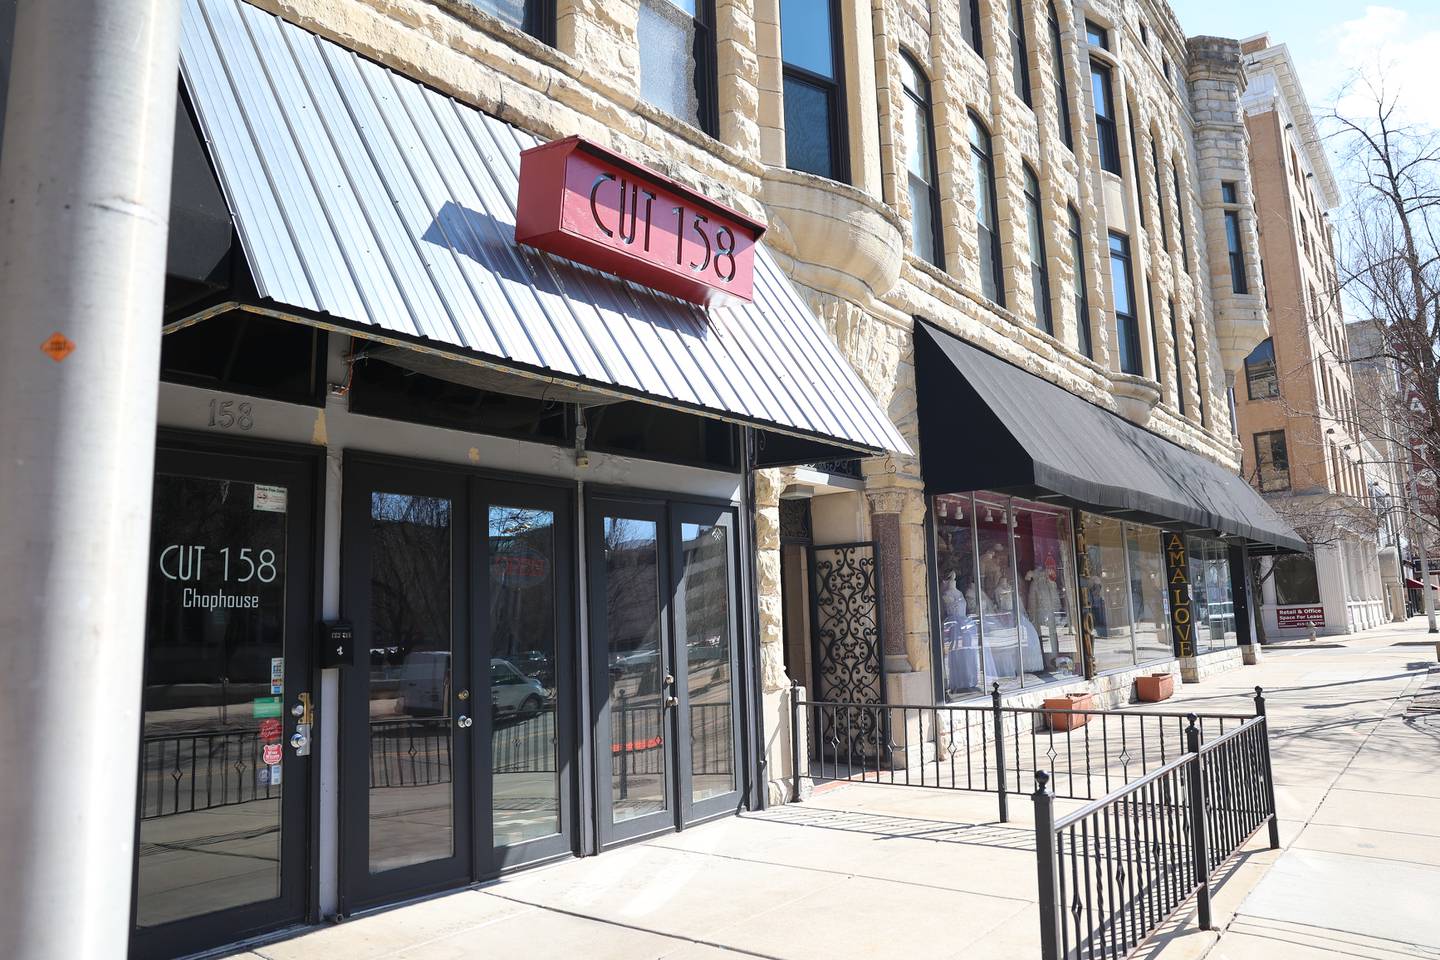 Recently opened Cut 158 restaurant along North Chicago Street. Wednesday, Mar. 9, 2022, in Joliet.